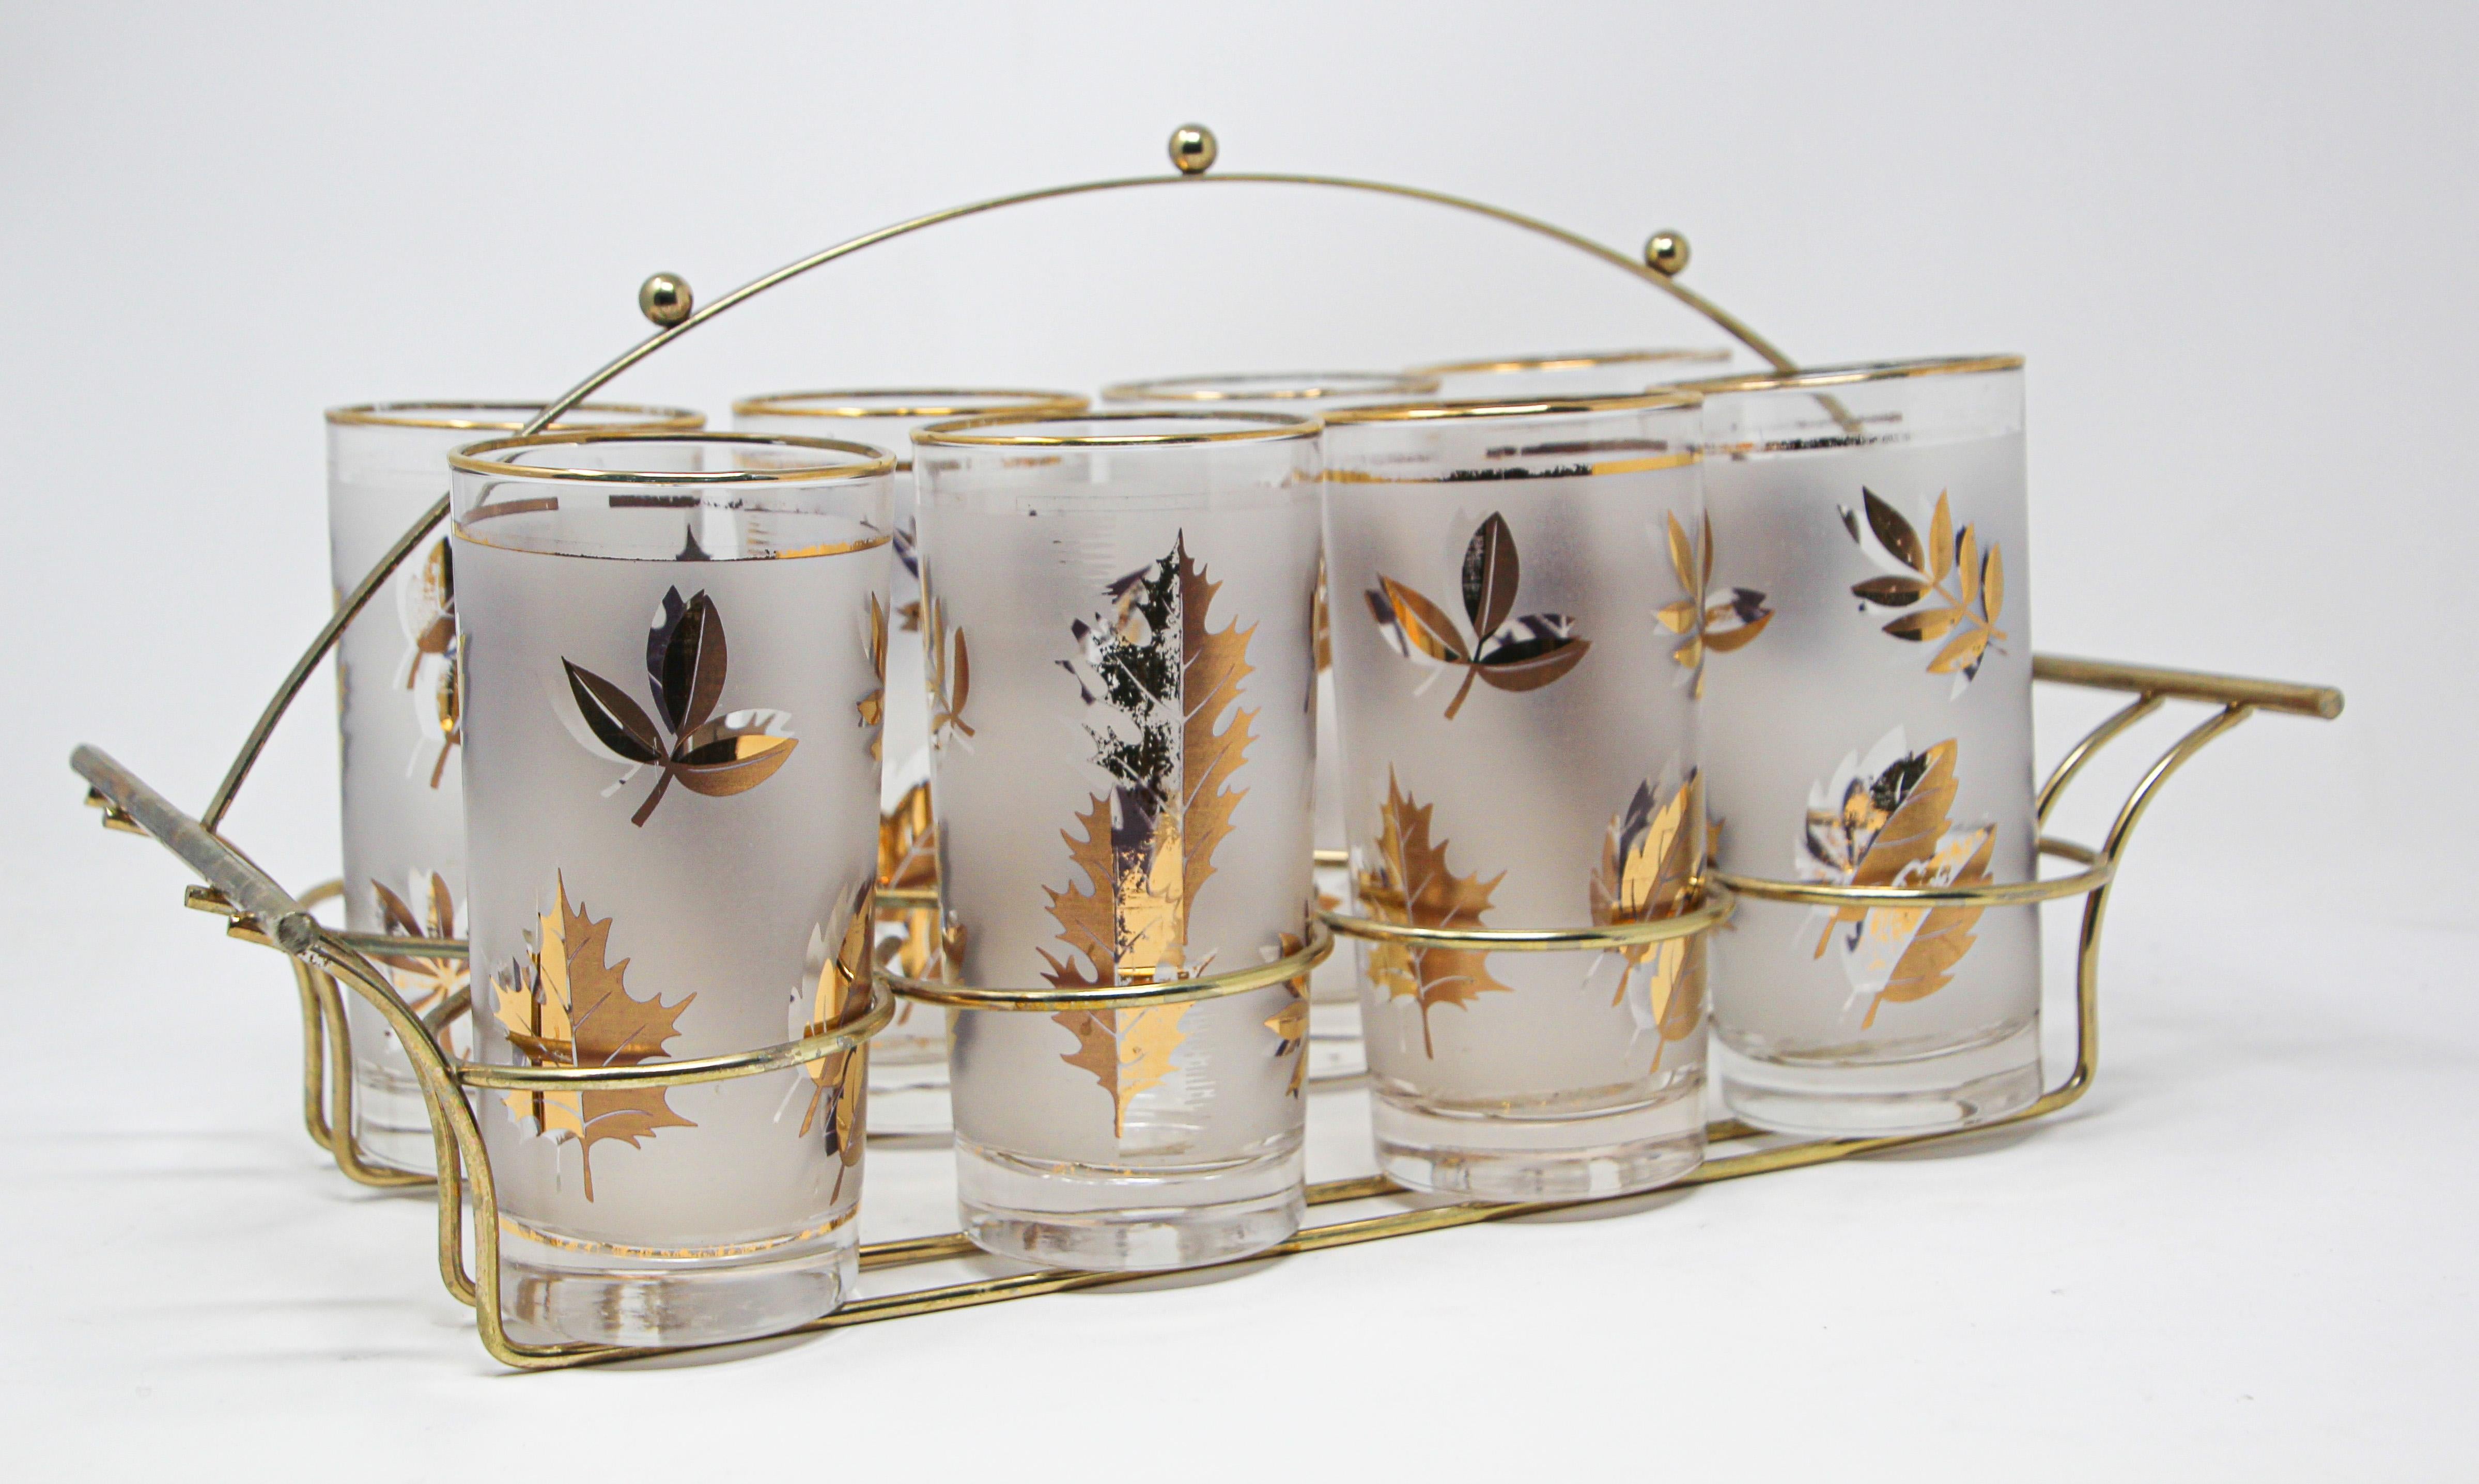 Elegant exquisite vintage set of eight Collins glasses designed by Libbey.
Set includes eight highball glasses in a polished brass cart with handle.
The glasses are decorated with gold leaf design.
Perfect vintage condition, with 22-karat gold leaf